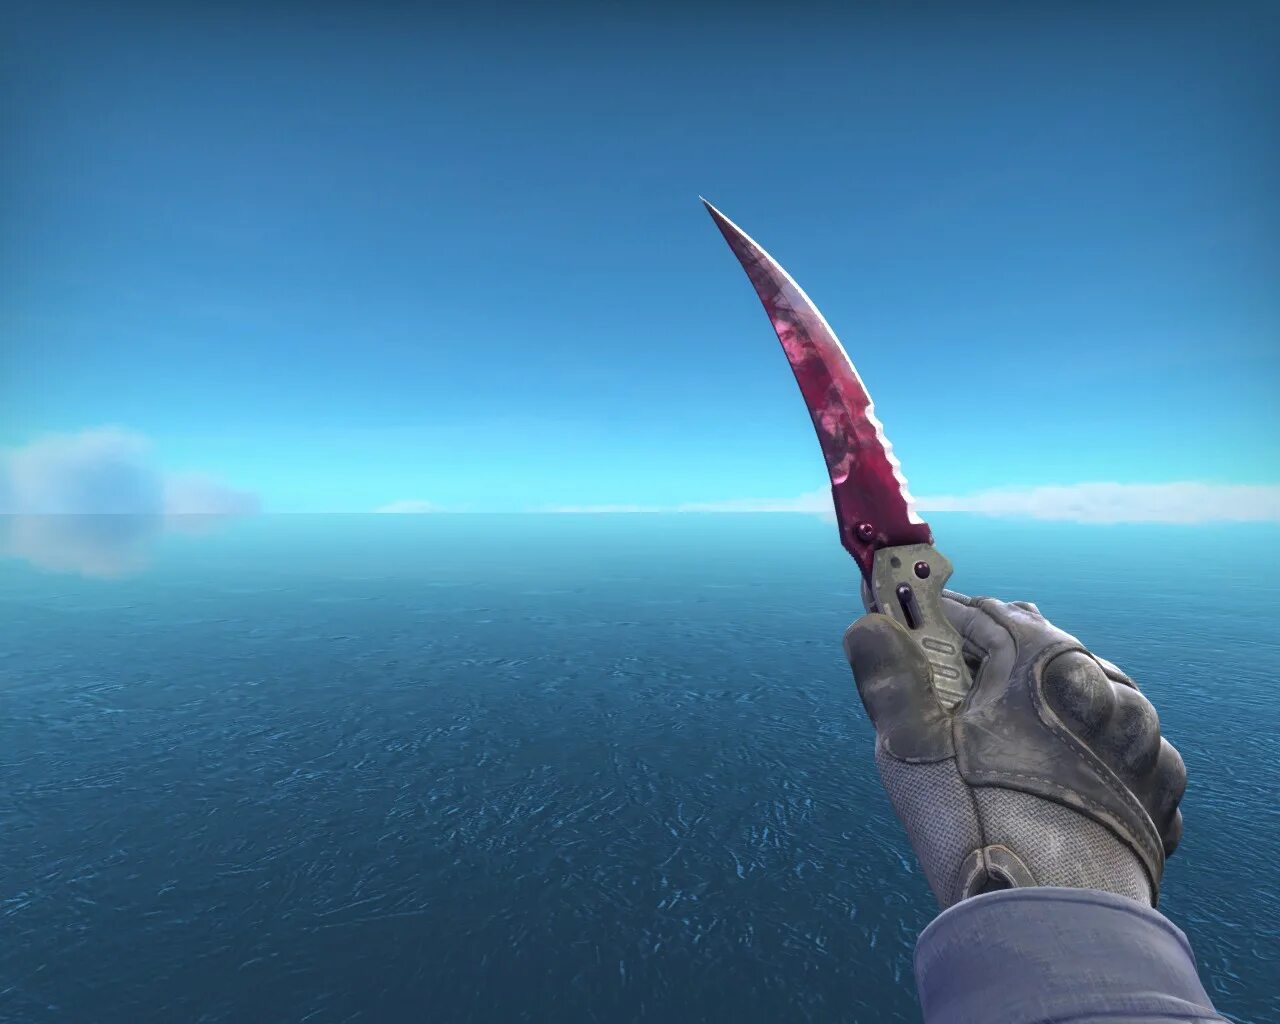 Play side. Flip Knife Sapphire. Нож сапфир КС го. Flip Knife Doppler. Flip Knife Doppler phase 4.